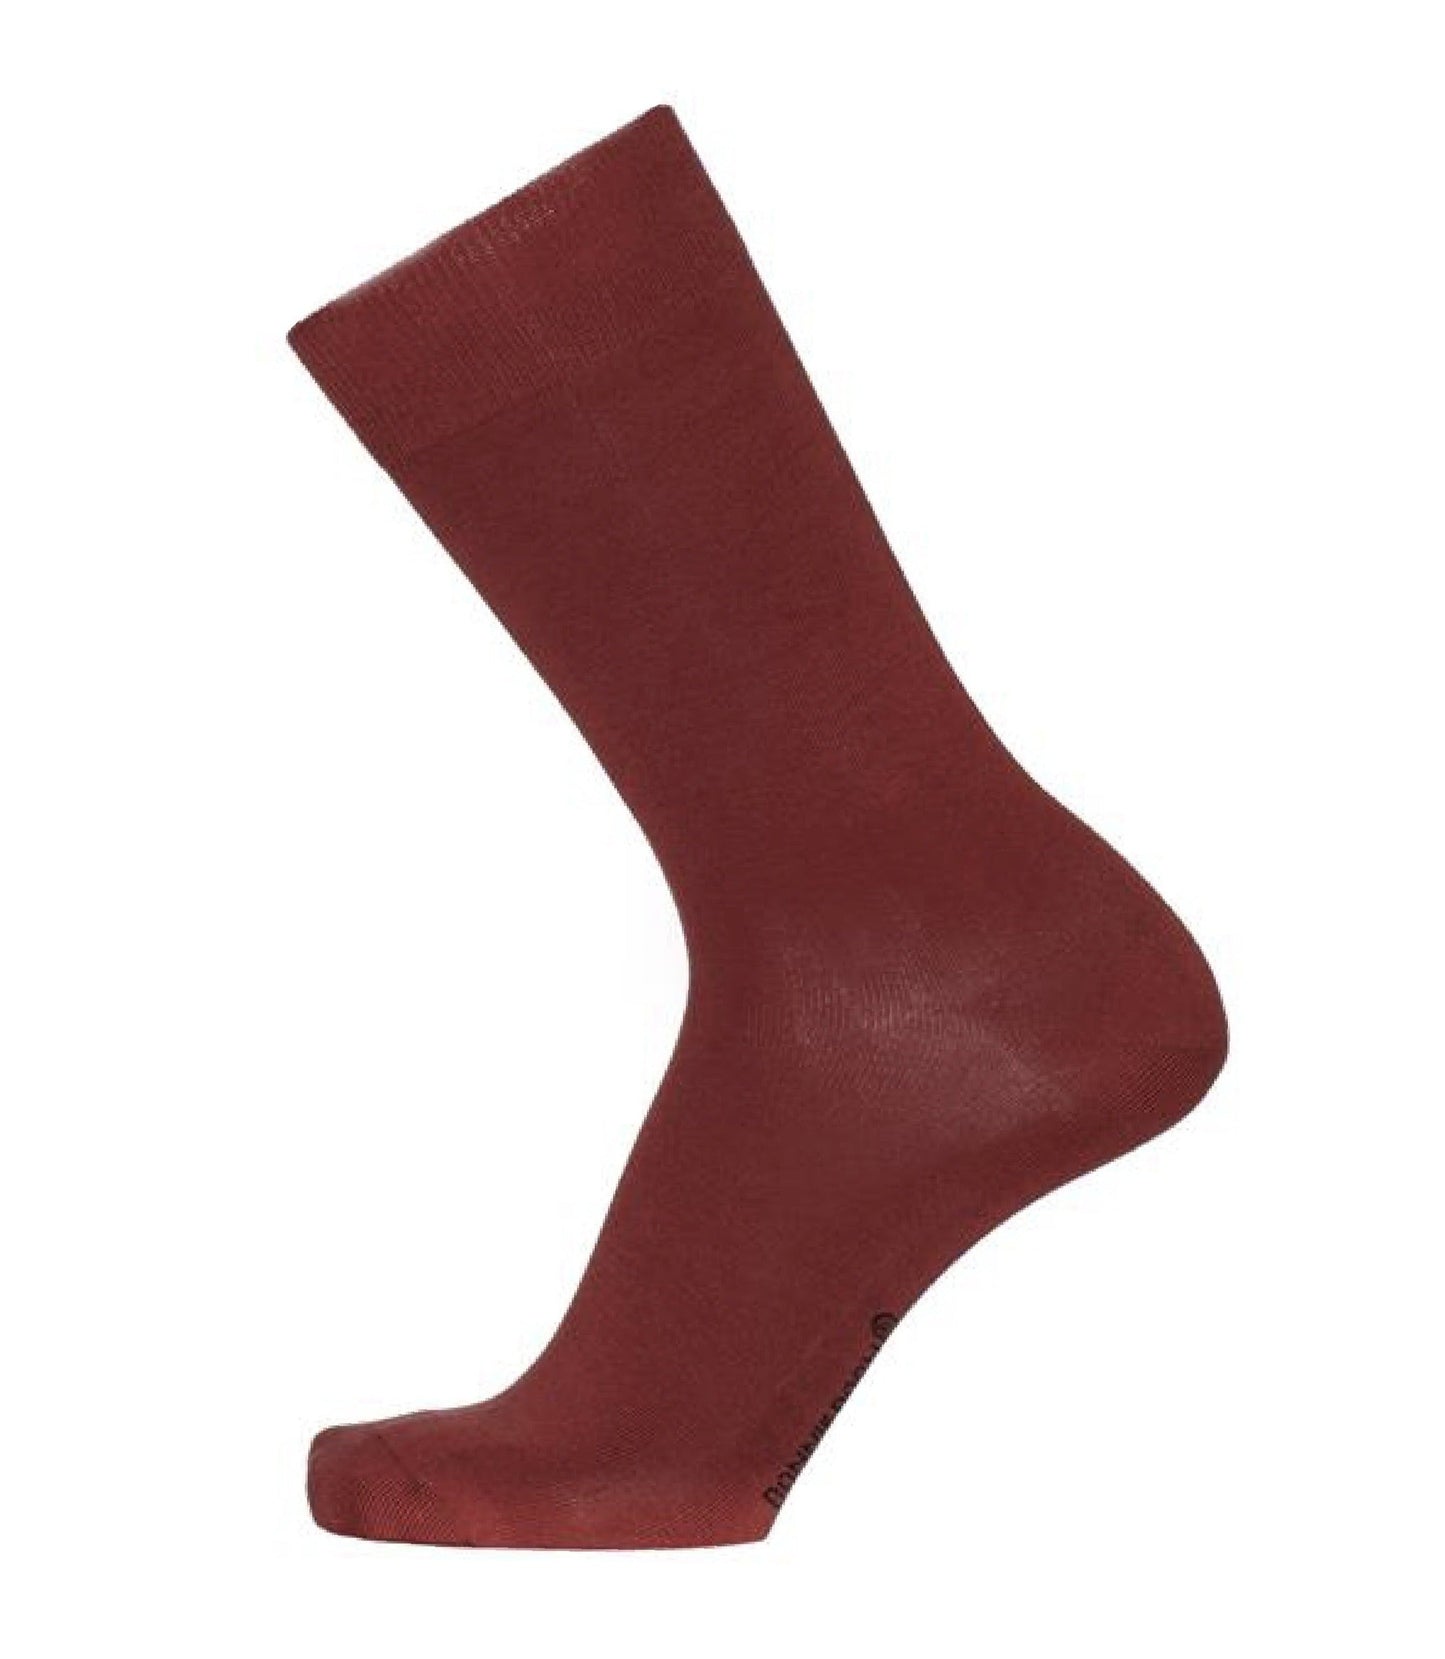 Bonnie Doon 83422 / BD632401 Cotton Sock - burgundy ankle socks available in men and women sizes